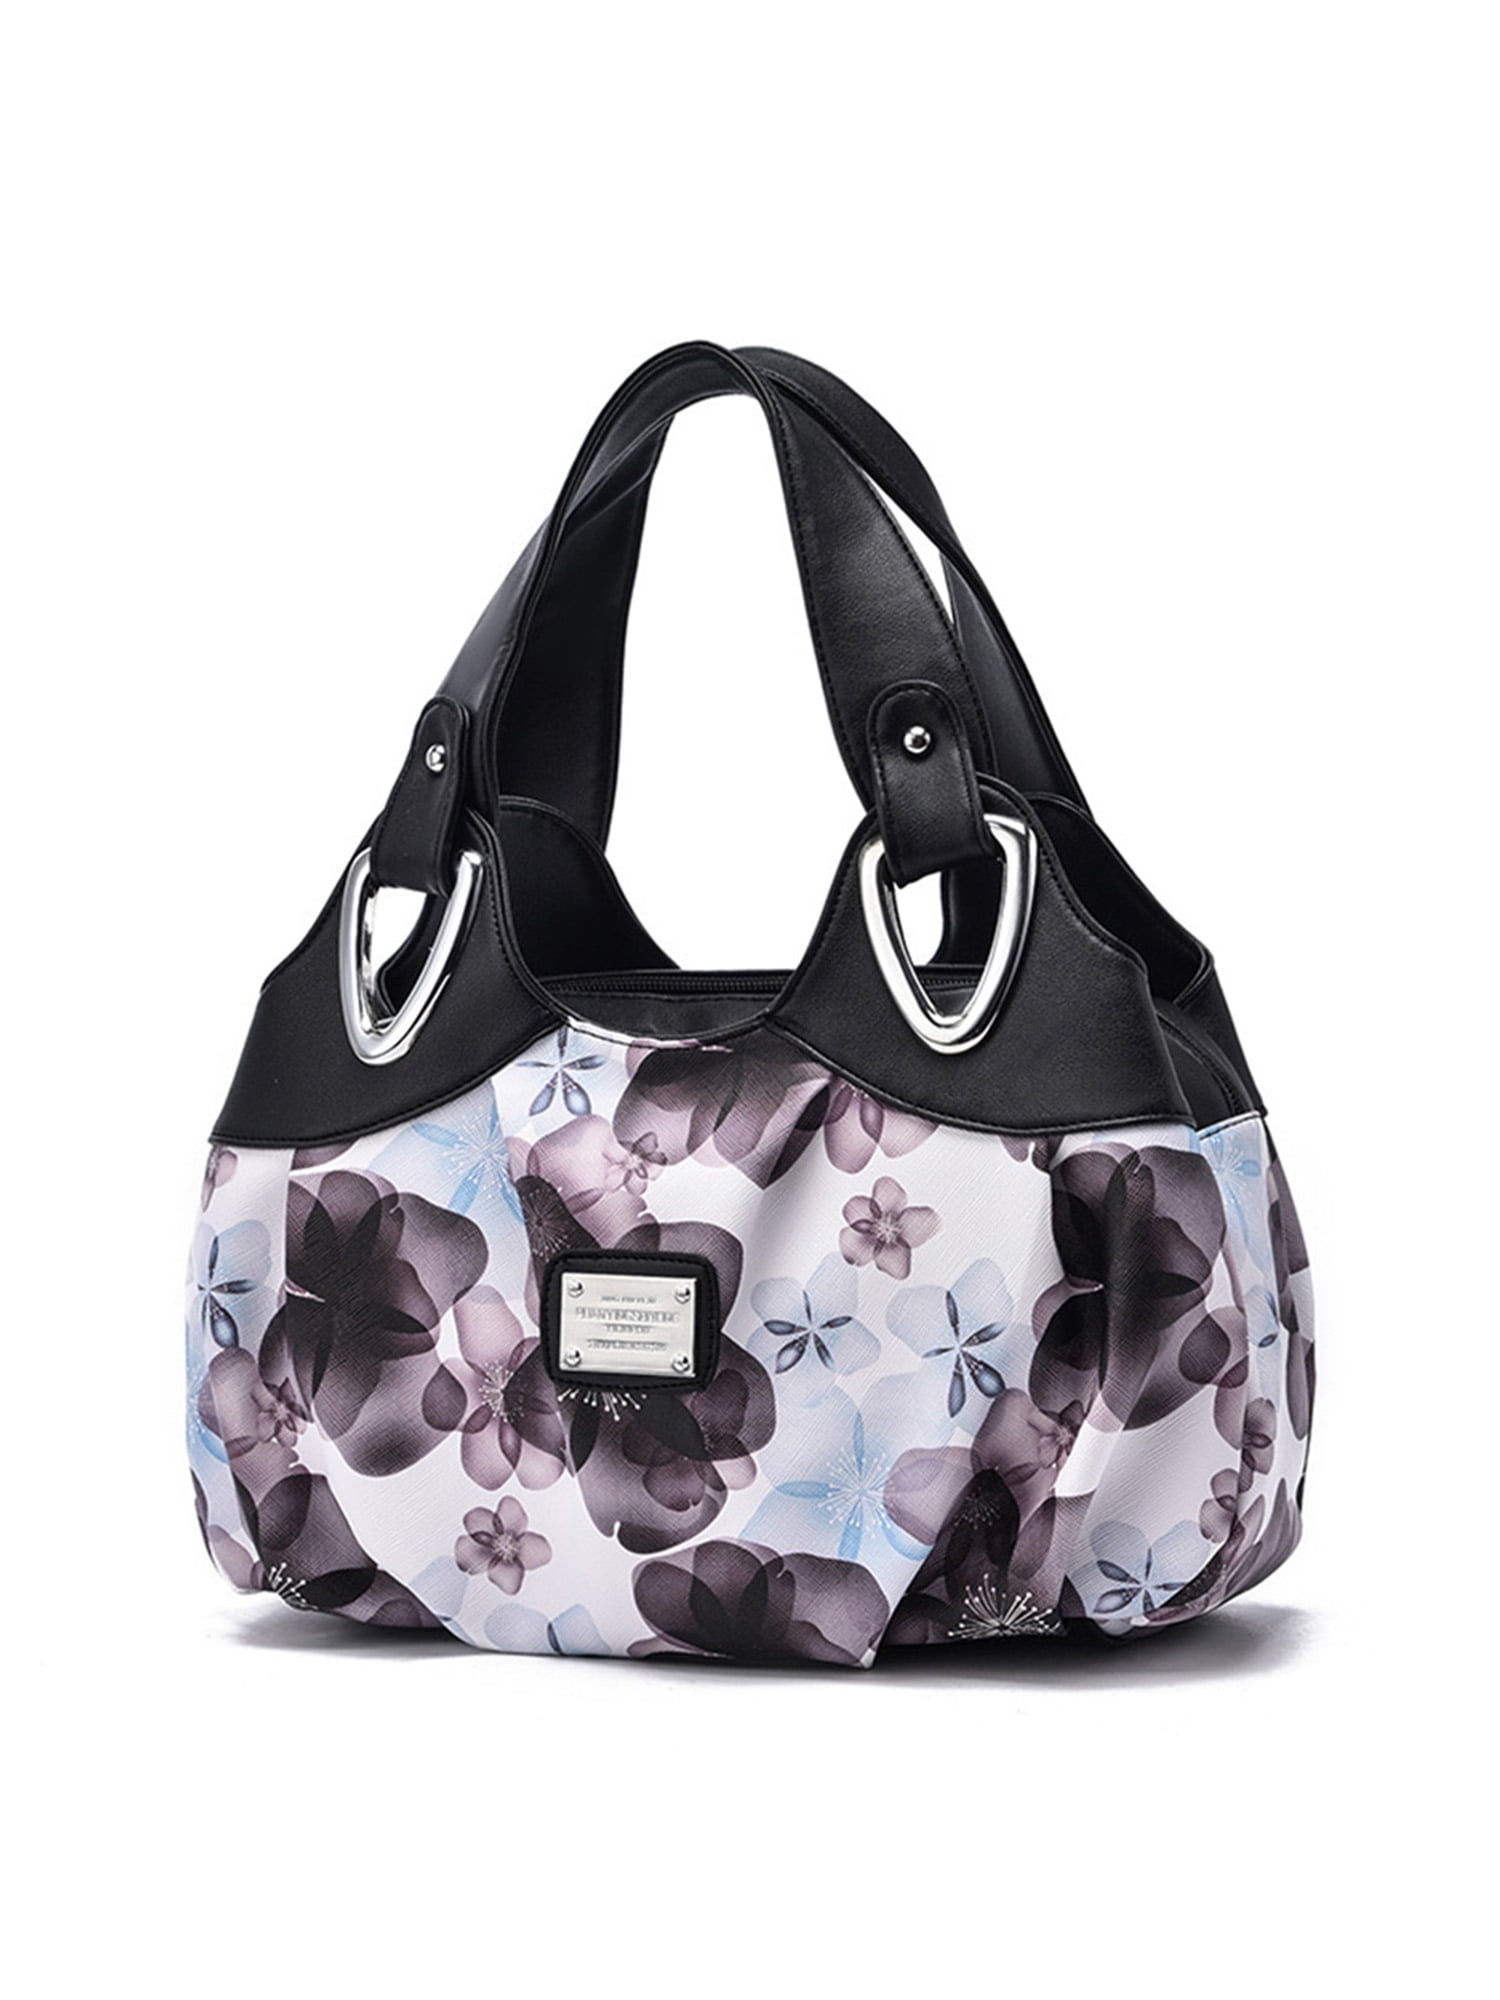 Hand Travel Bag Rabbits In Flower Pots Leather Hand Totes Bag Causal Handbags Zipped Shoulder Organizer For Lady Girls Womens Tote Kids 